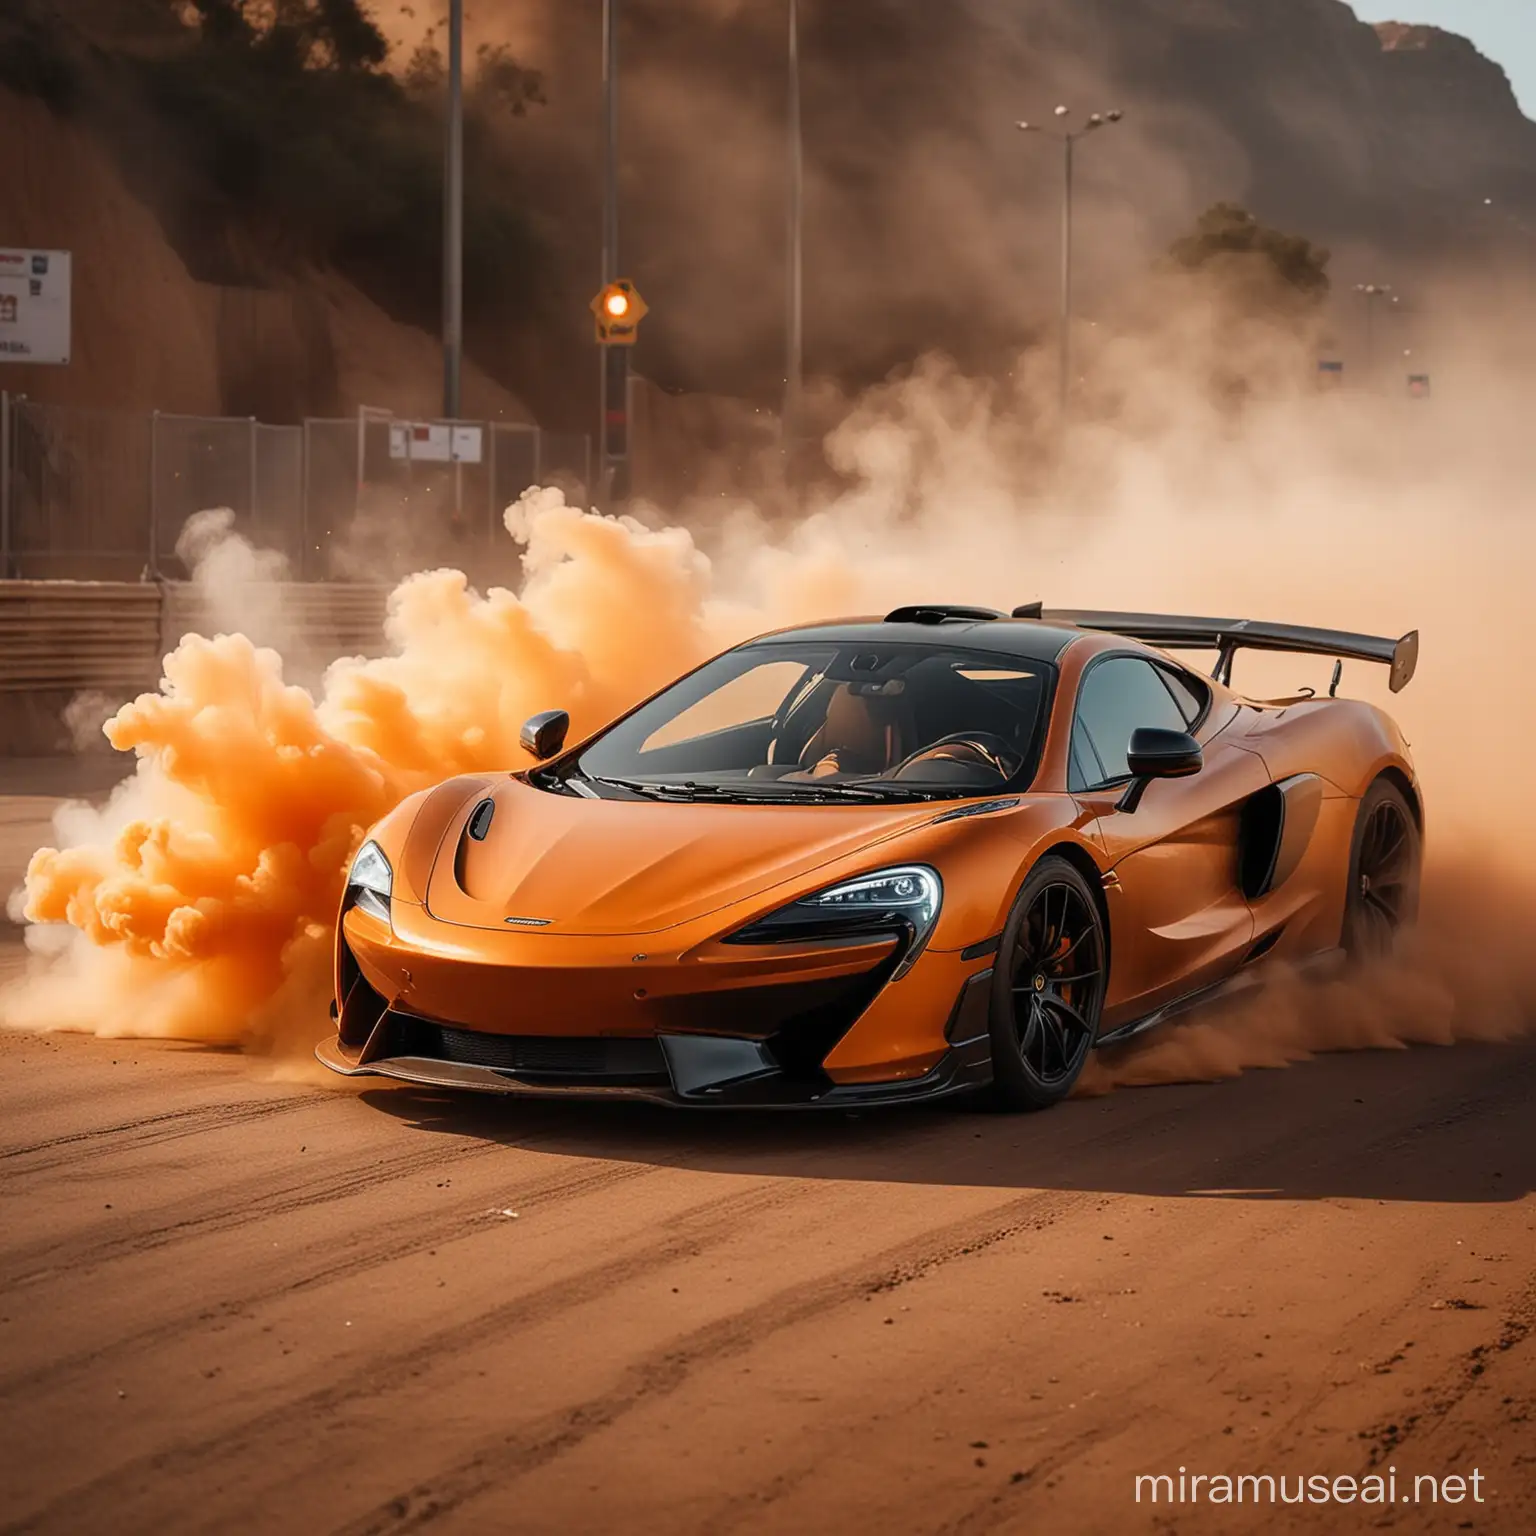 Create an image of a McLaren 600 LT escaping cops by drifting on a ramp with orange smoke in the dust. Have the Orange smoke be the drigt smoke and make the image with bokeh effects at night time with illuminating and vibrant colors 